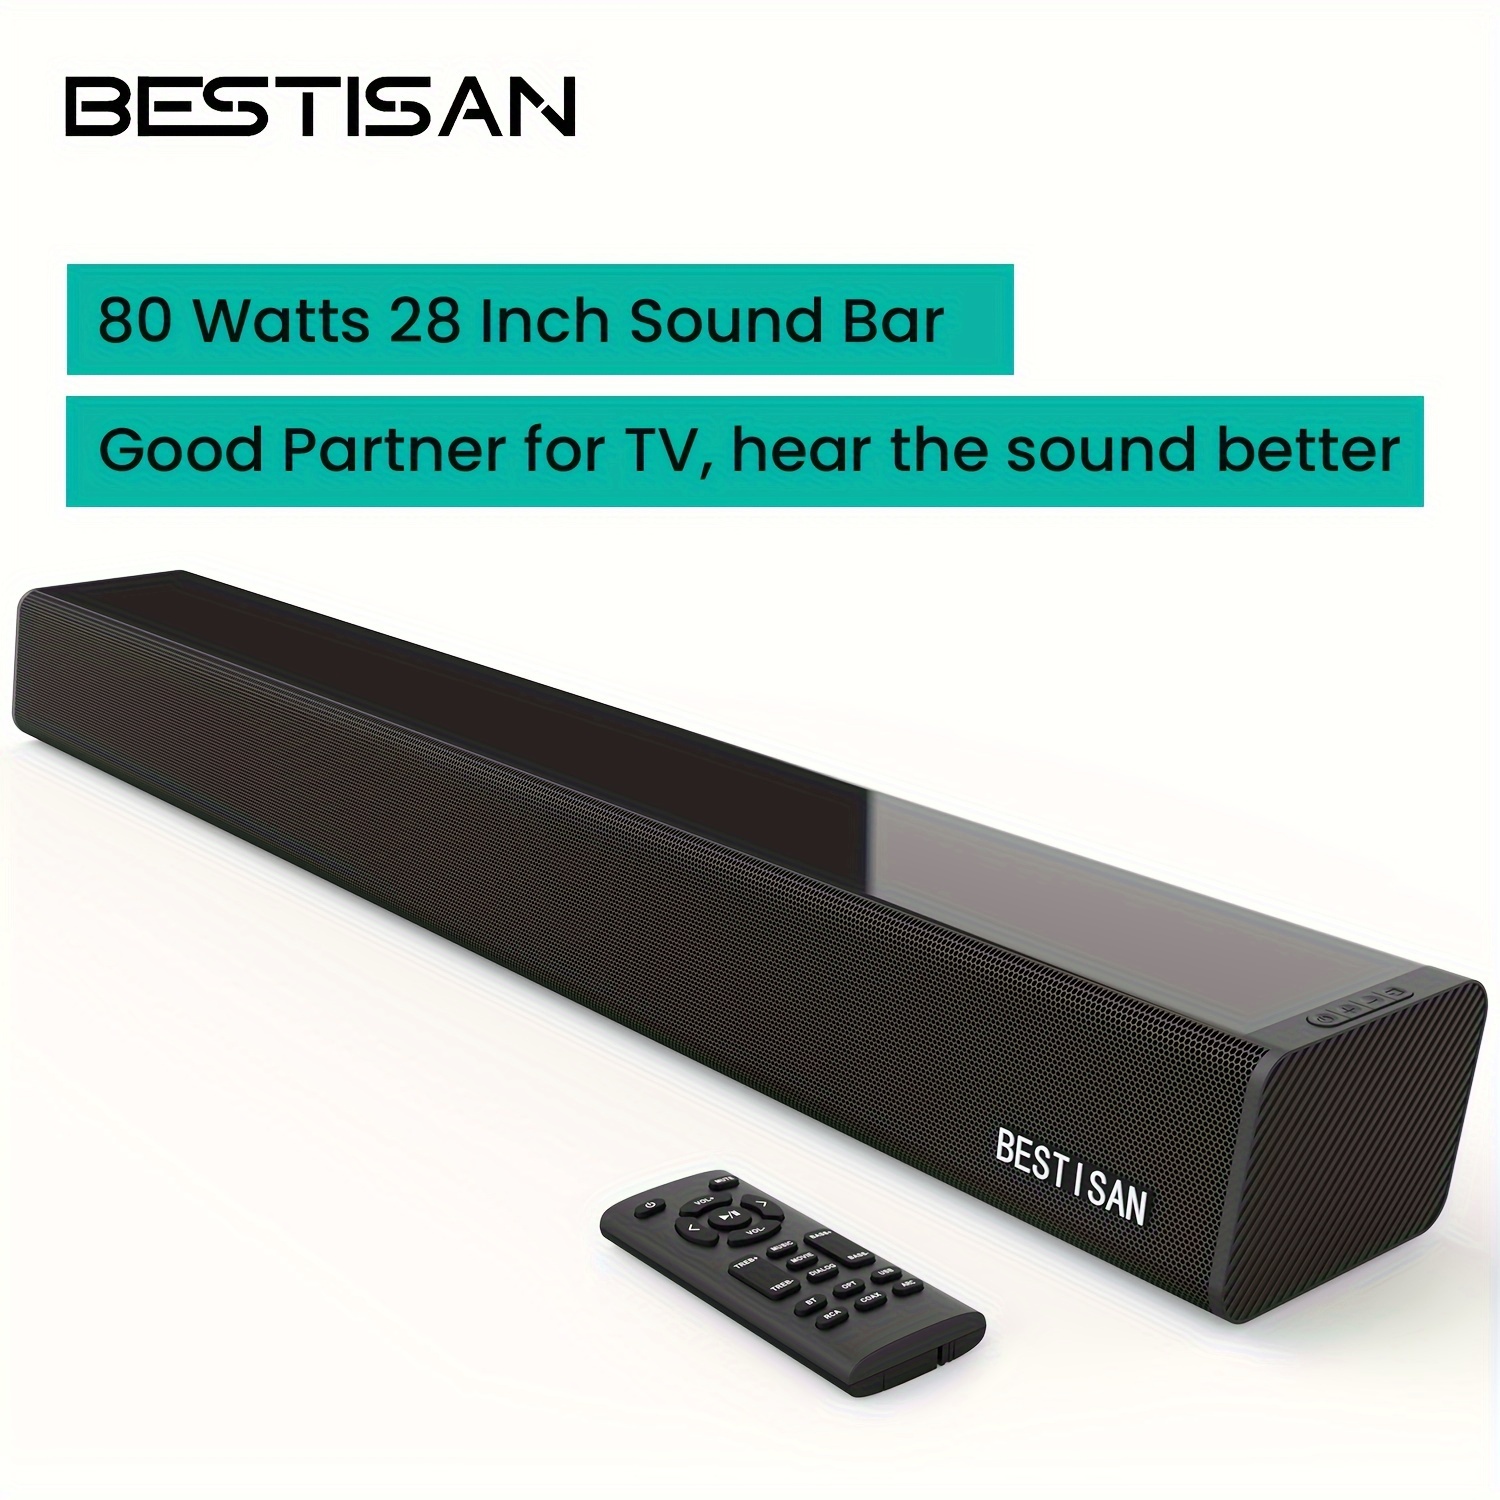 

Bestisan Soundbar 28-inch 80w With Arc, Bt 5.0, Optical Coaxial Usb Aux Connection, 4 Speakers, 3 Eqs, 110db Surround Sound Bar Home Theater Audio For Tv, Wall Mountable, Bass Adjustable